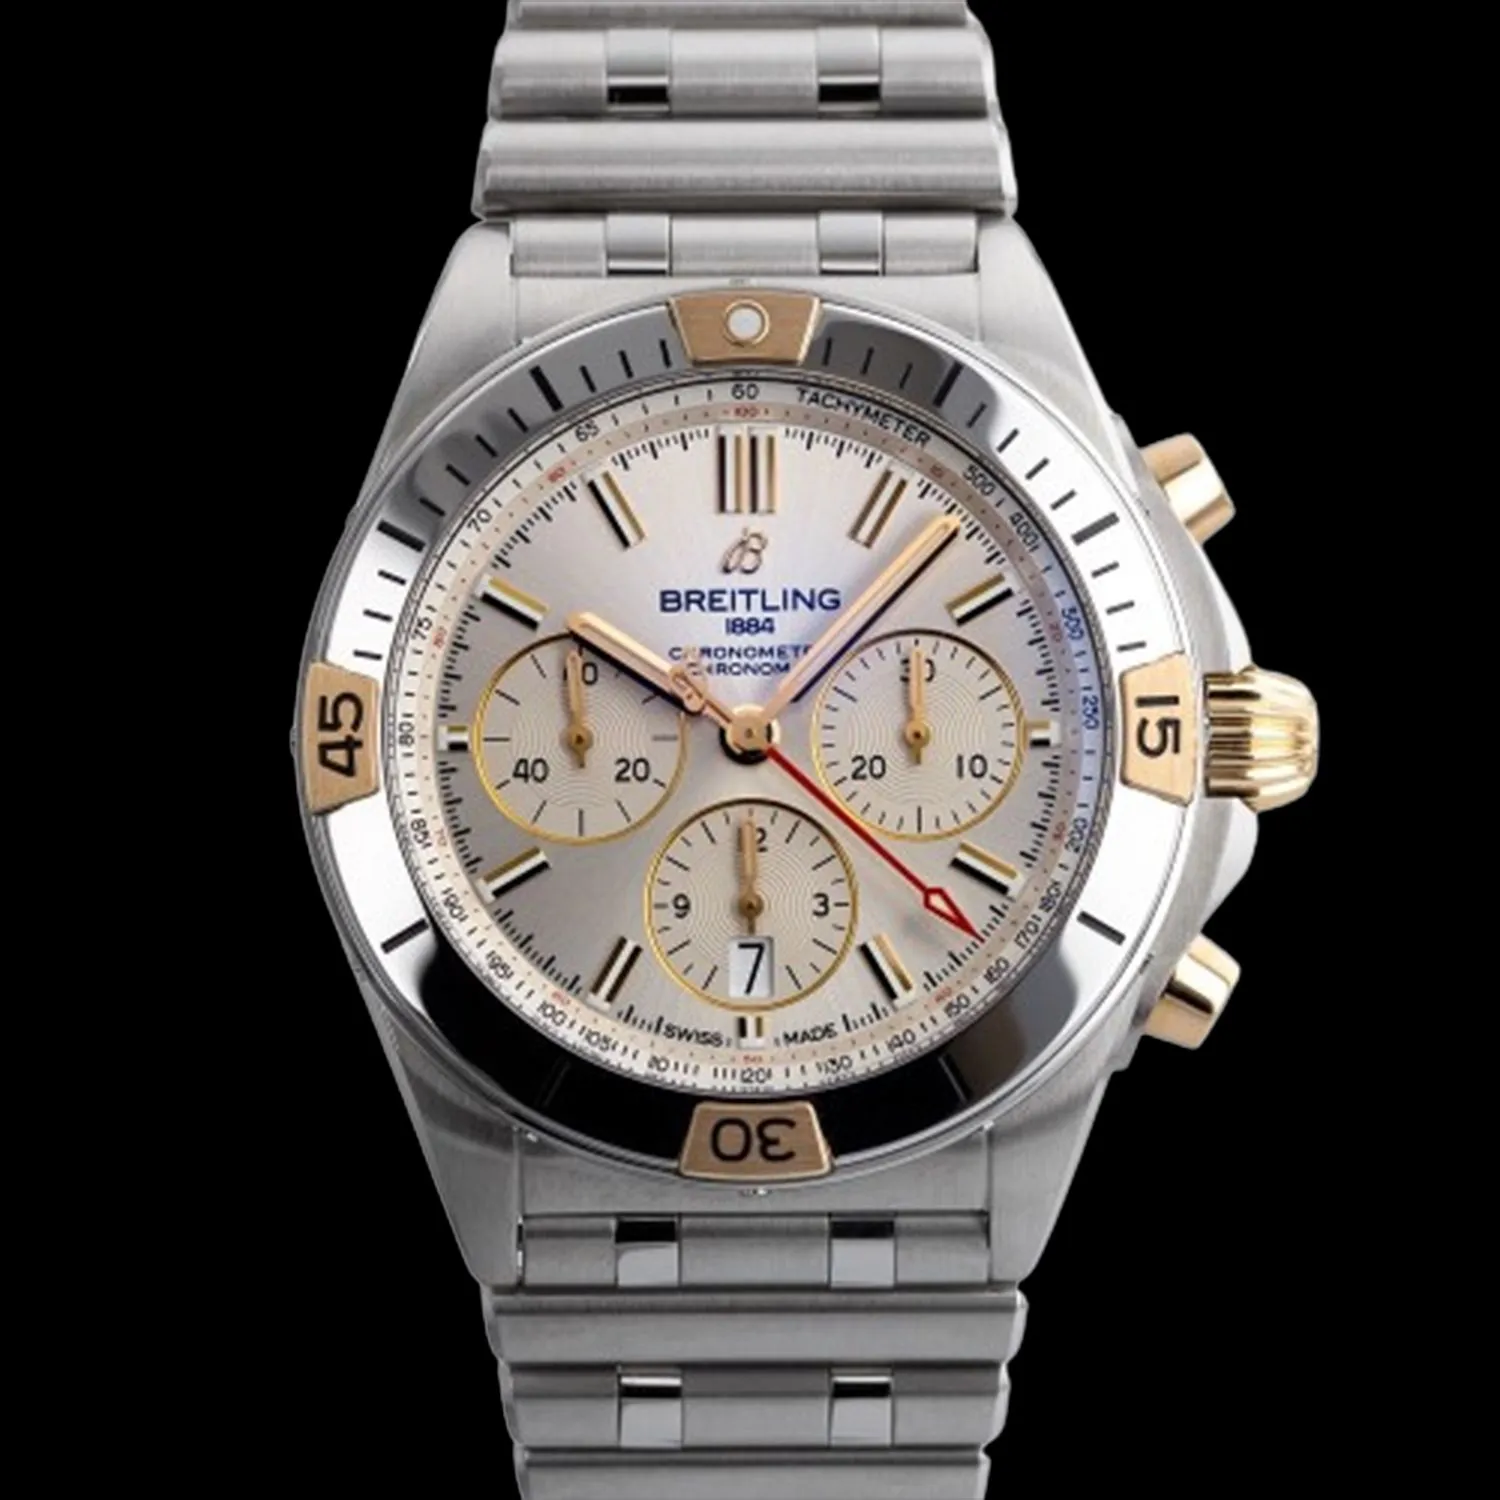 Breitling Chronomat 42mm Rose gold and stainless steel